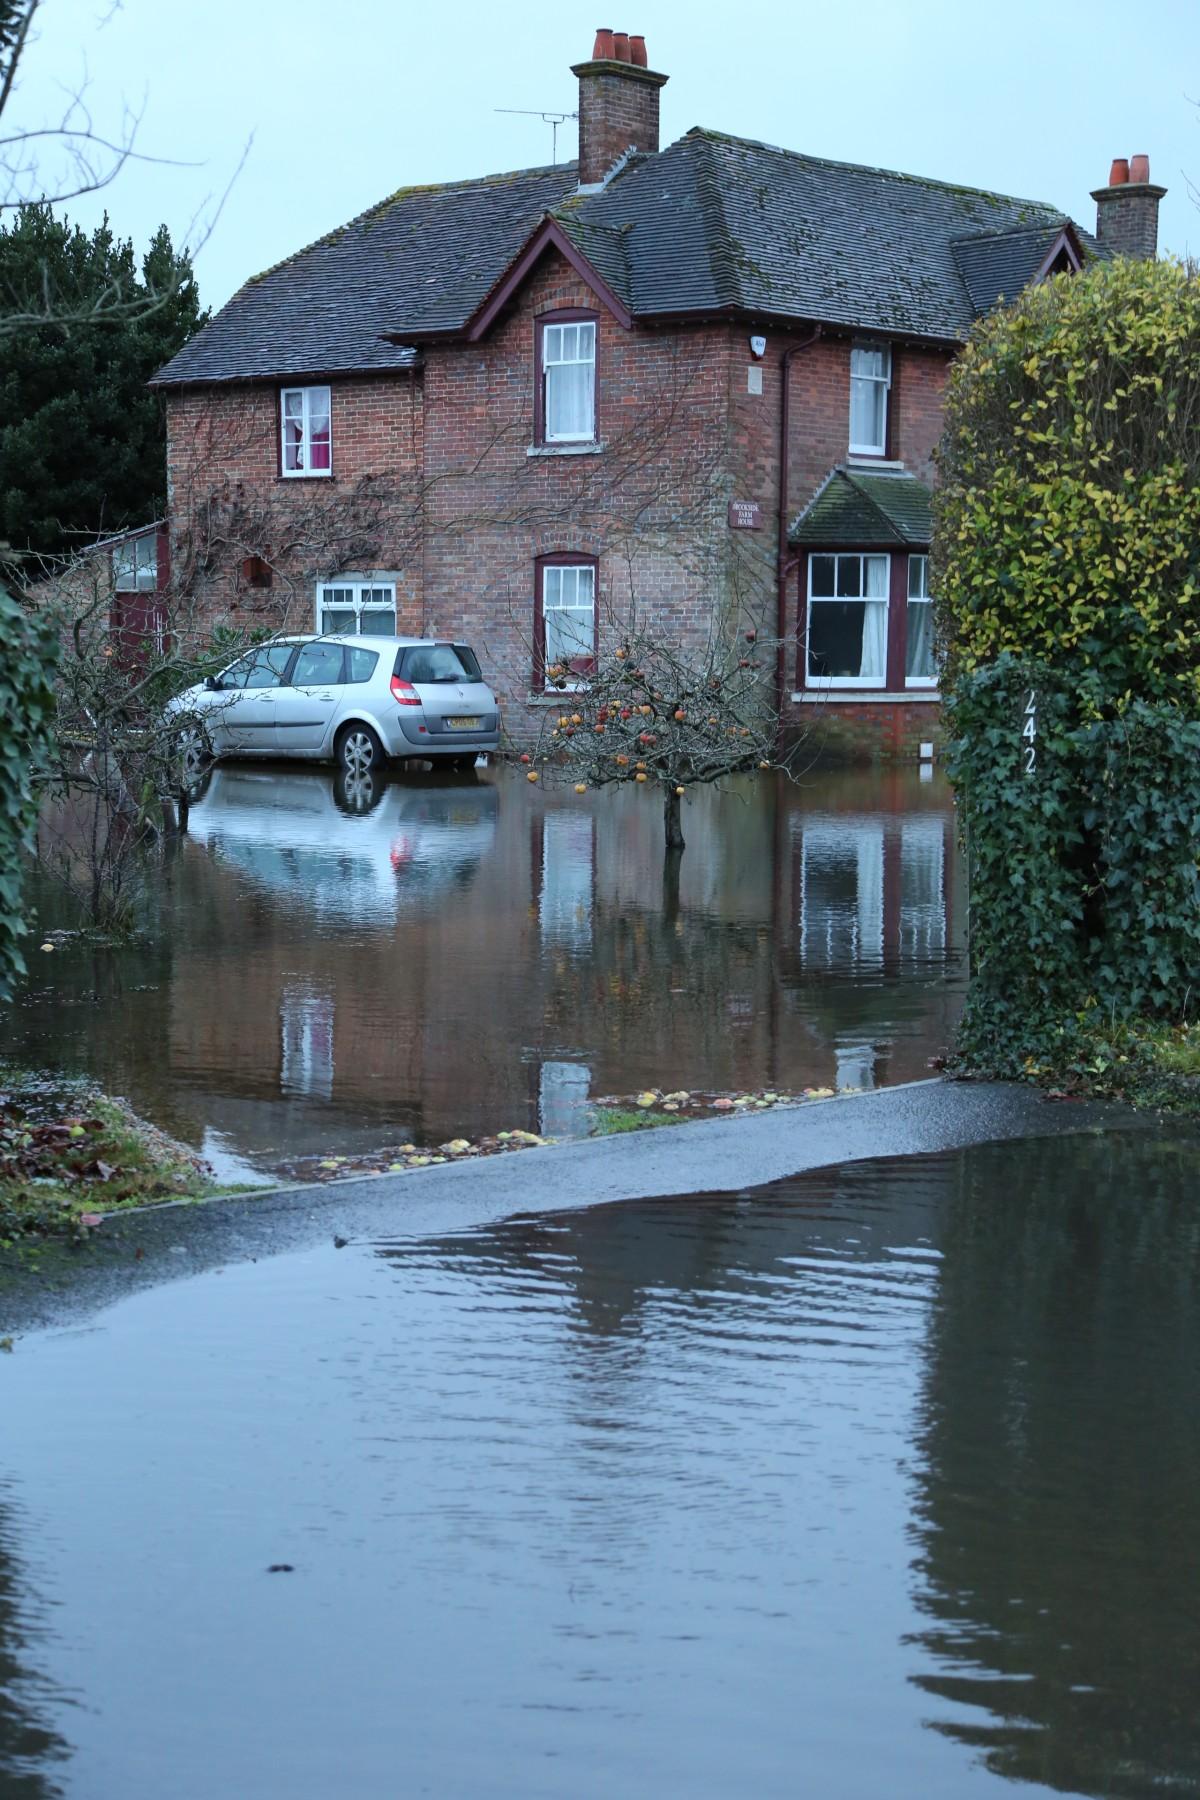 Pictures taken by Daily Echo photographers and readers after heavy rain and strong winds hit Dorset on December 23 and 24, 2013. Flooded driveway in Leigh Road in Wimborne,